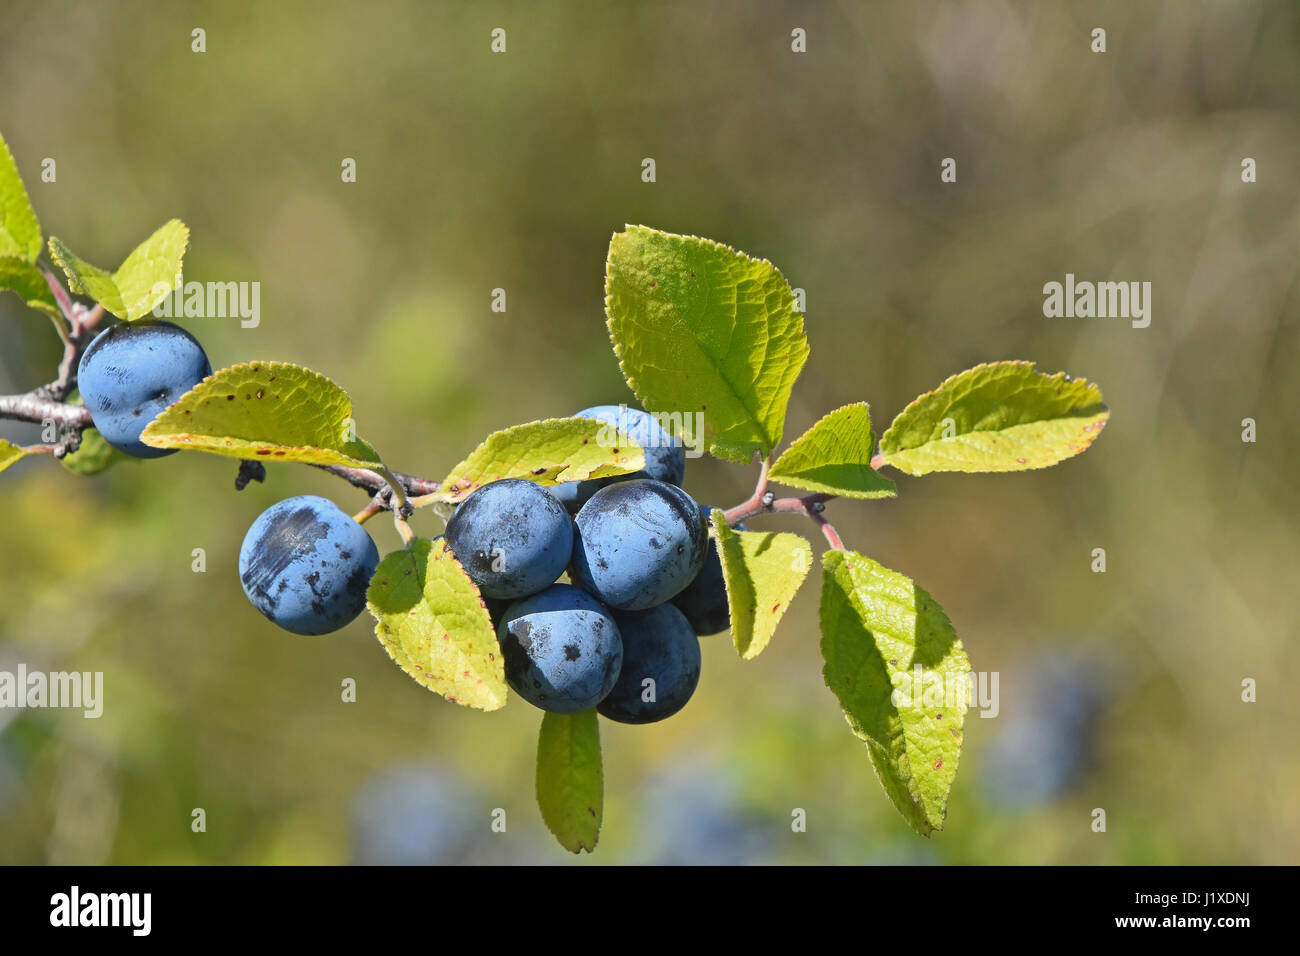 Branch of blackthorn (Prunus spinosa) with ripe berries and green leaves, close up Stock Photo